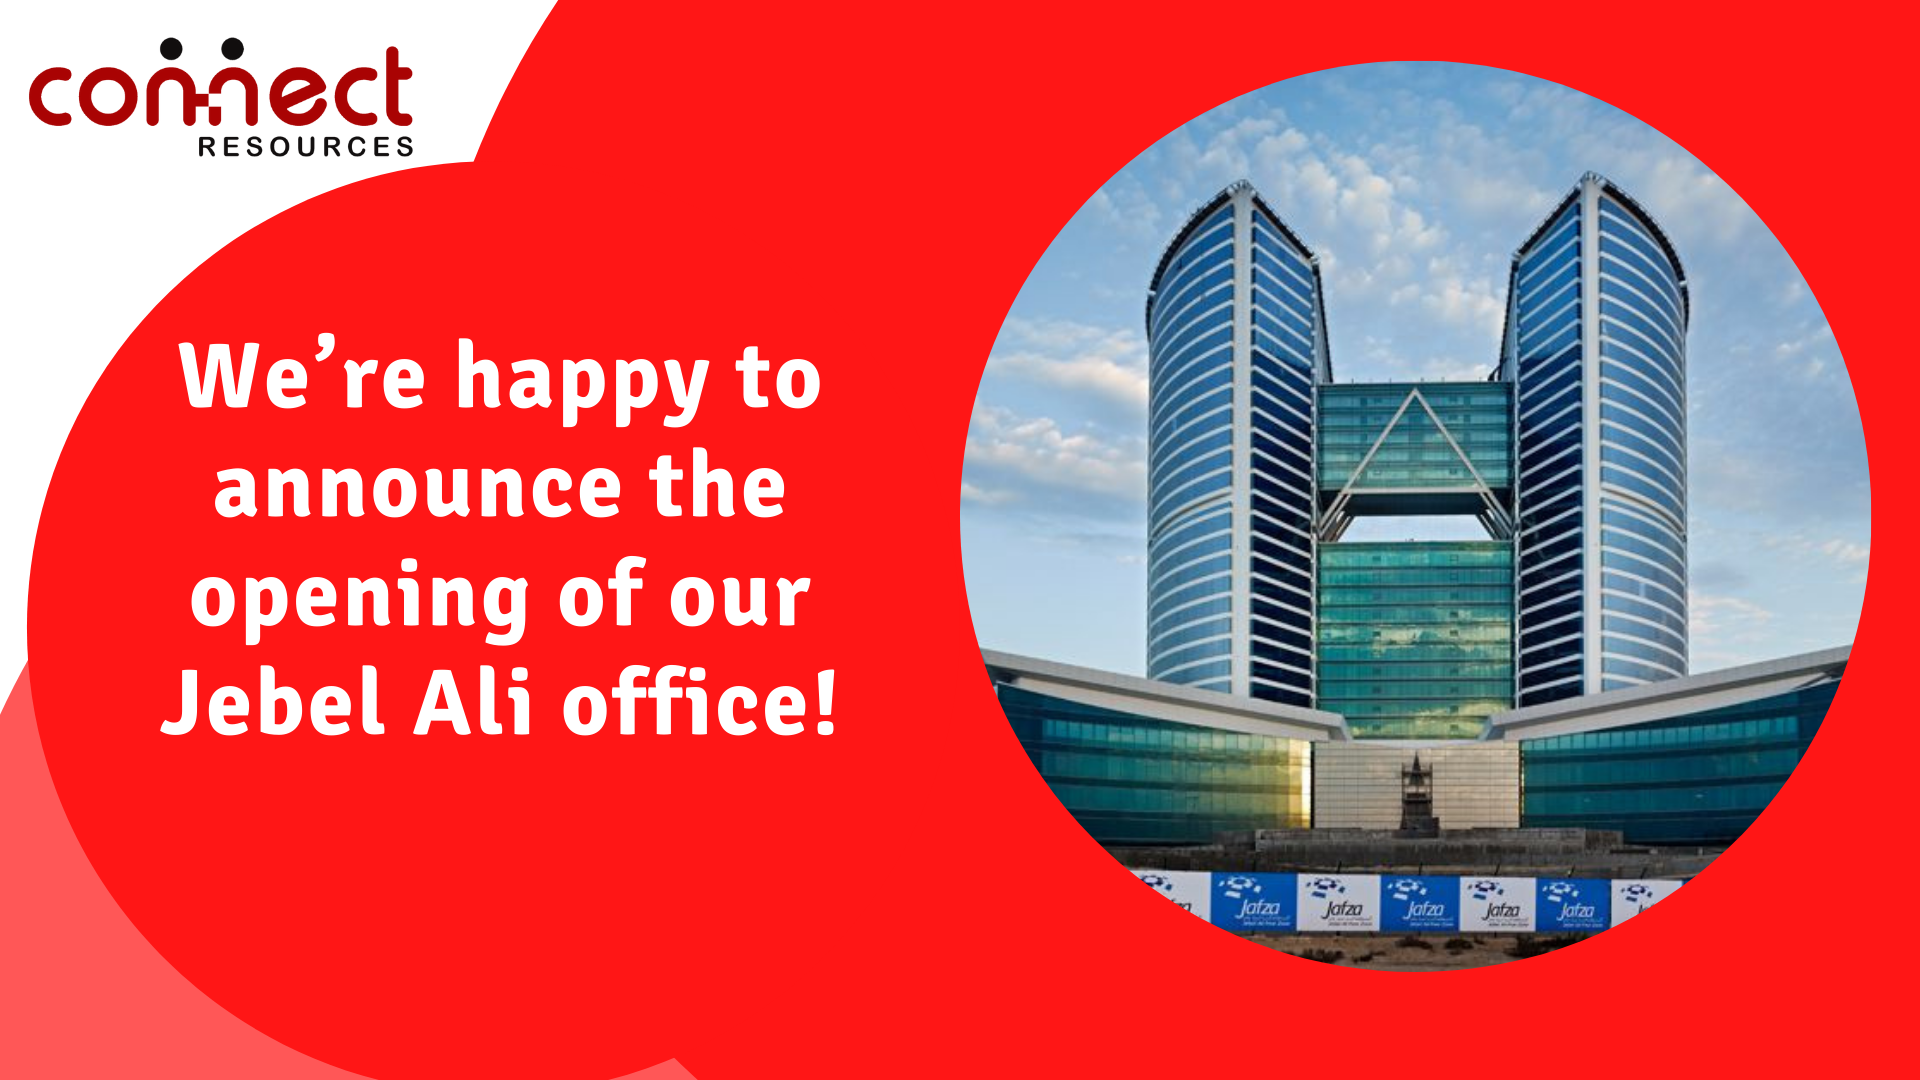 We’re happy to announce the opening of our Jebel Ali office!